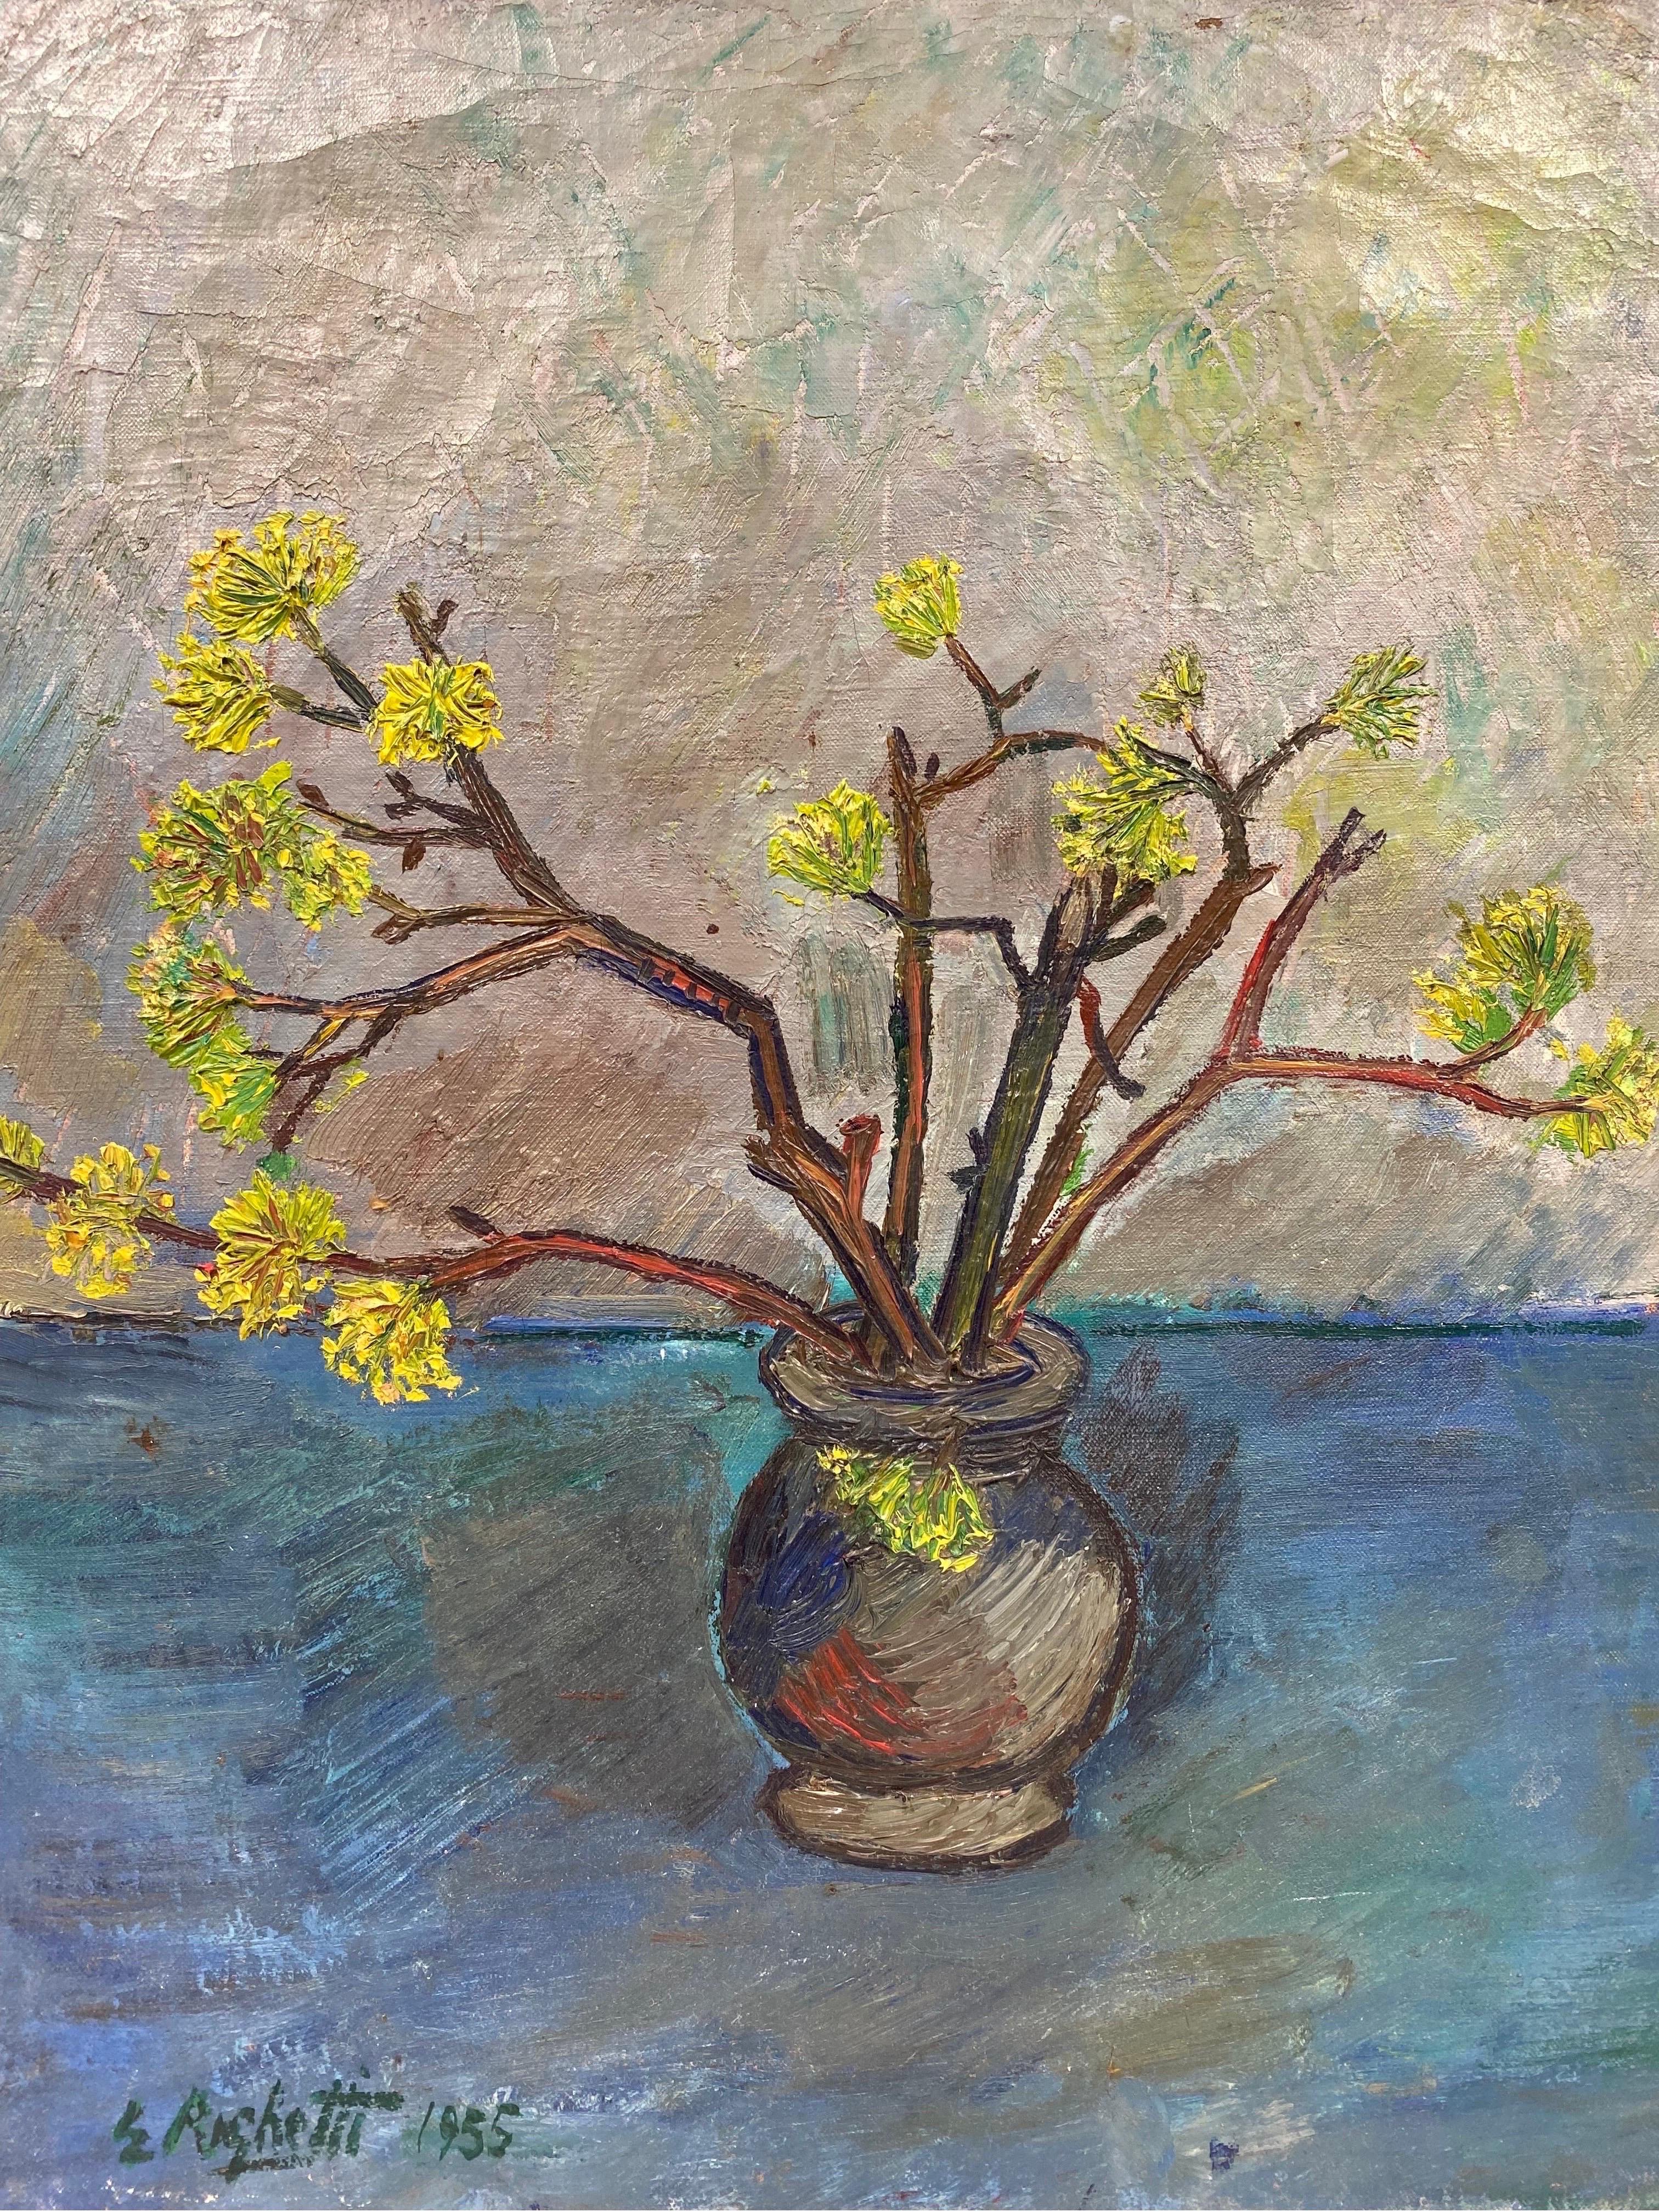 Blossom
by Édouard Righetti (1924-2001)
influenced by the works of Vincent van Gogh

Signed lower front and back

oil painting on canvas, beautifully painted with rick thick impasto oil and bold colors. 
very good condition
In Wooden frame
size: